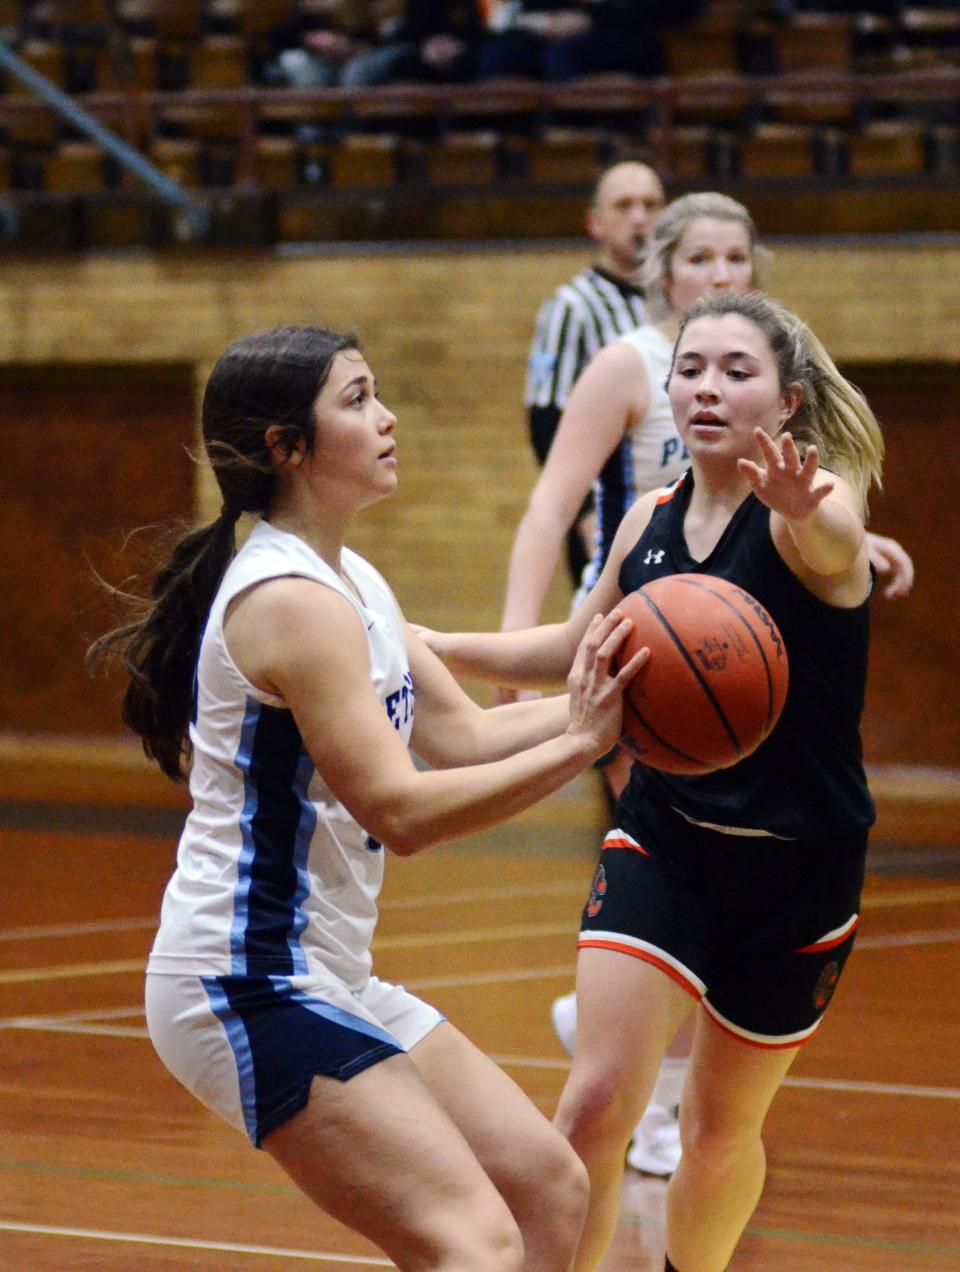 Petoskey's Ellie Stolzenfels pulls up for a jumper before Cheboygan's Cassidy Jewell runs in.